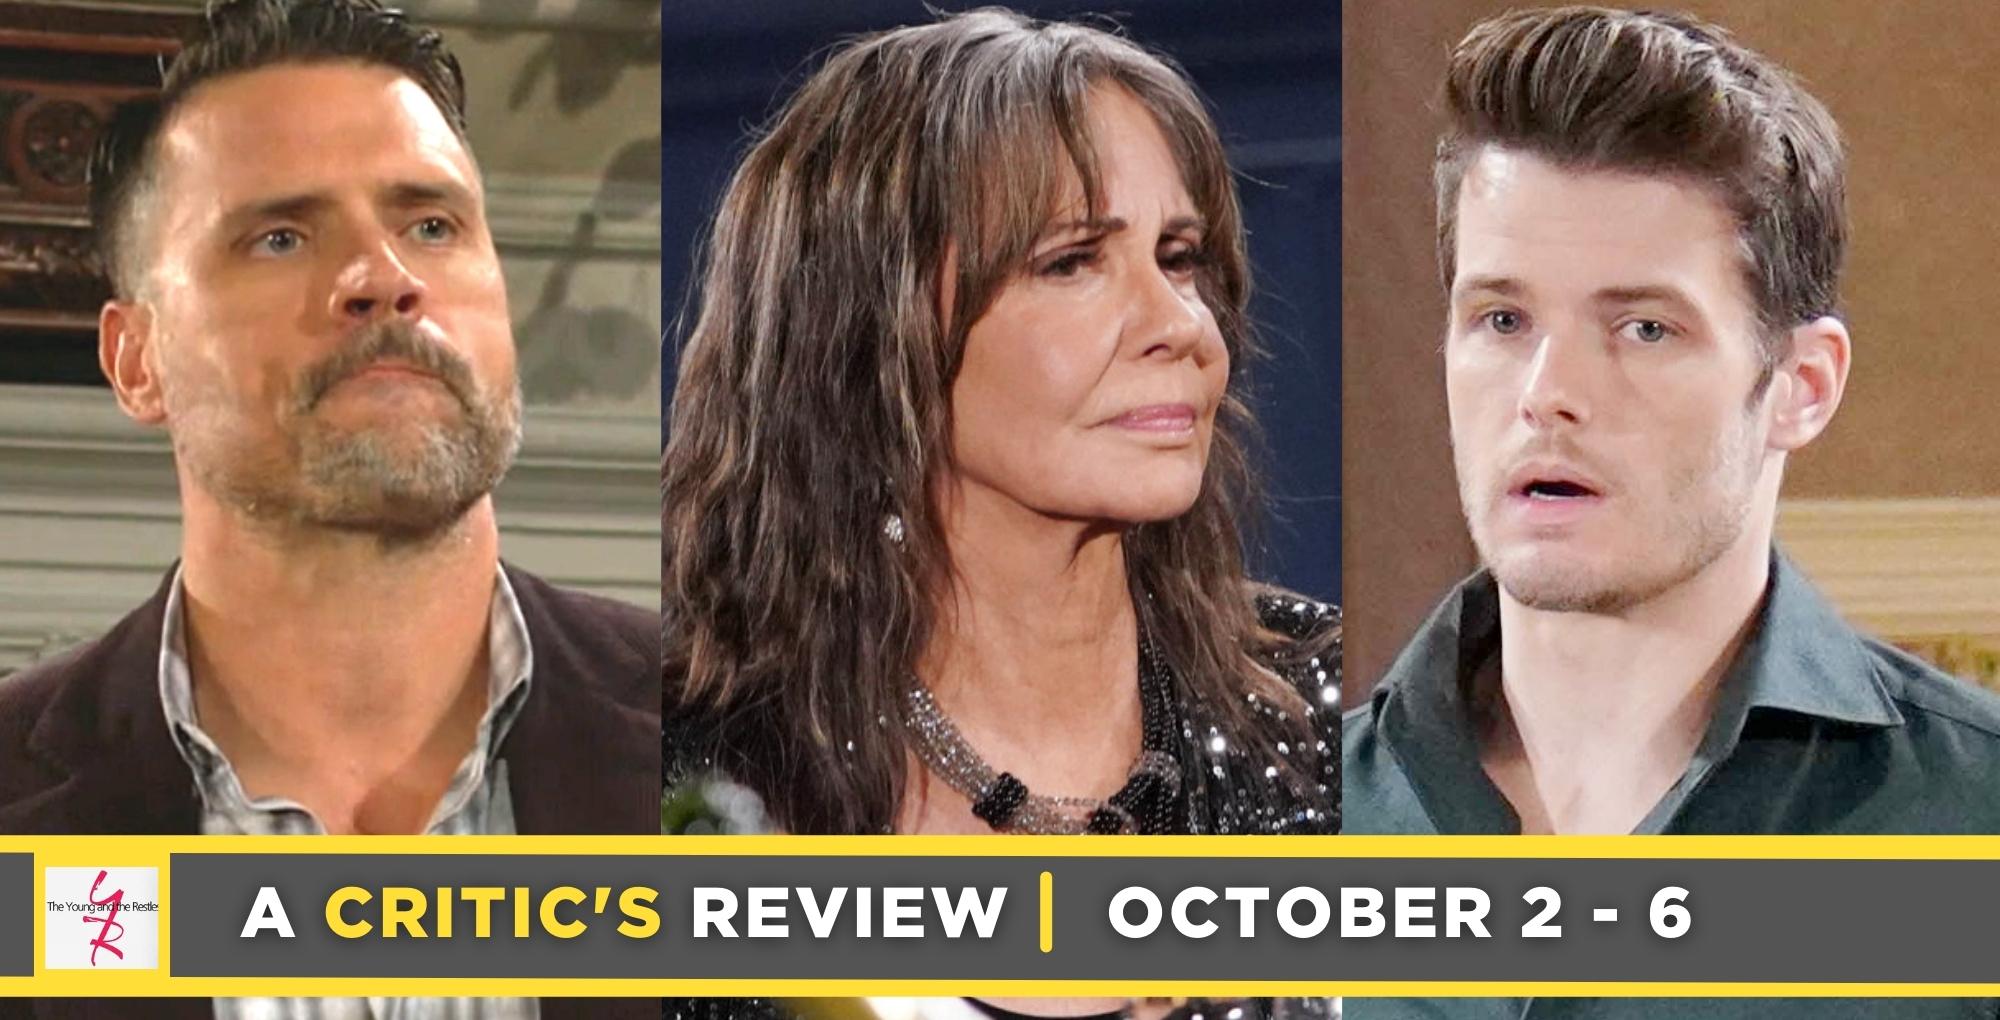 the young and the restless critic's review for october 2 – october 6, 2023, three images, nicholas, jill, and kyle.